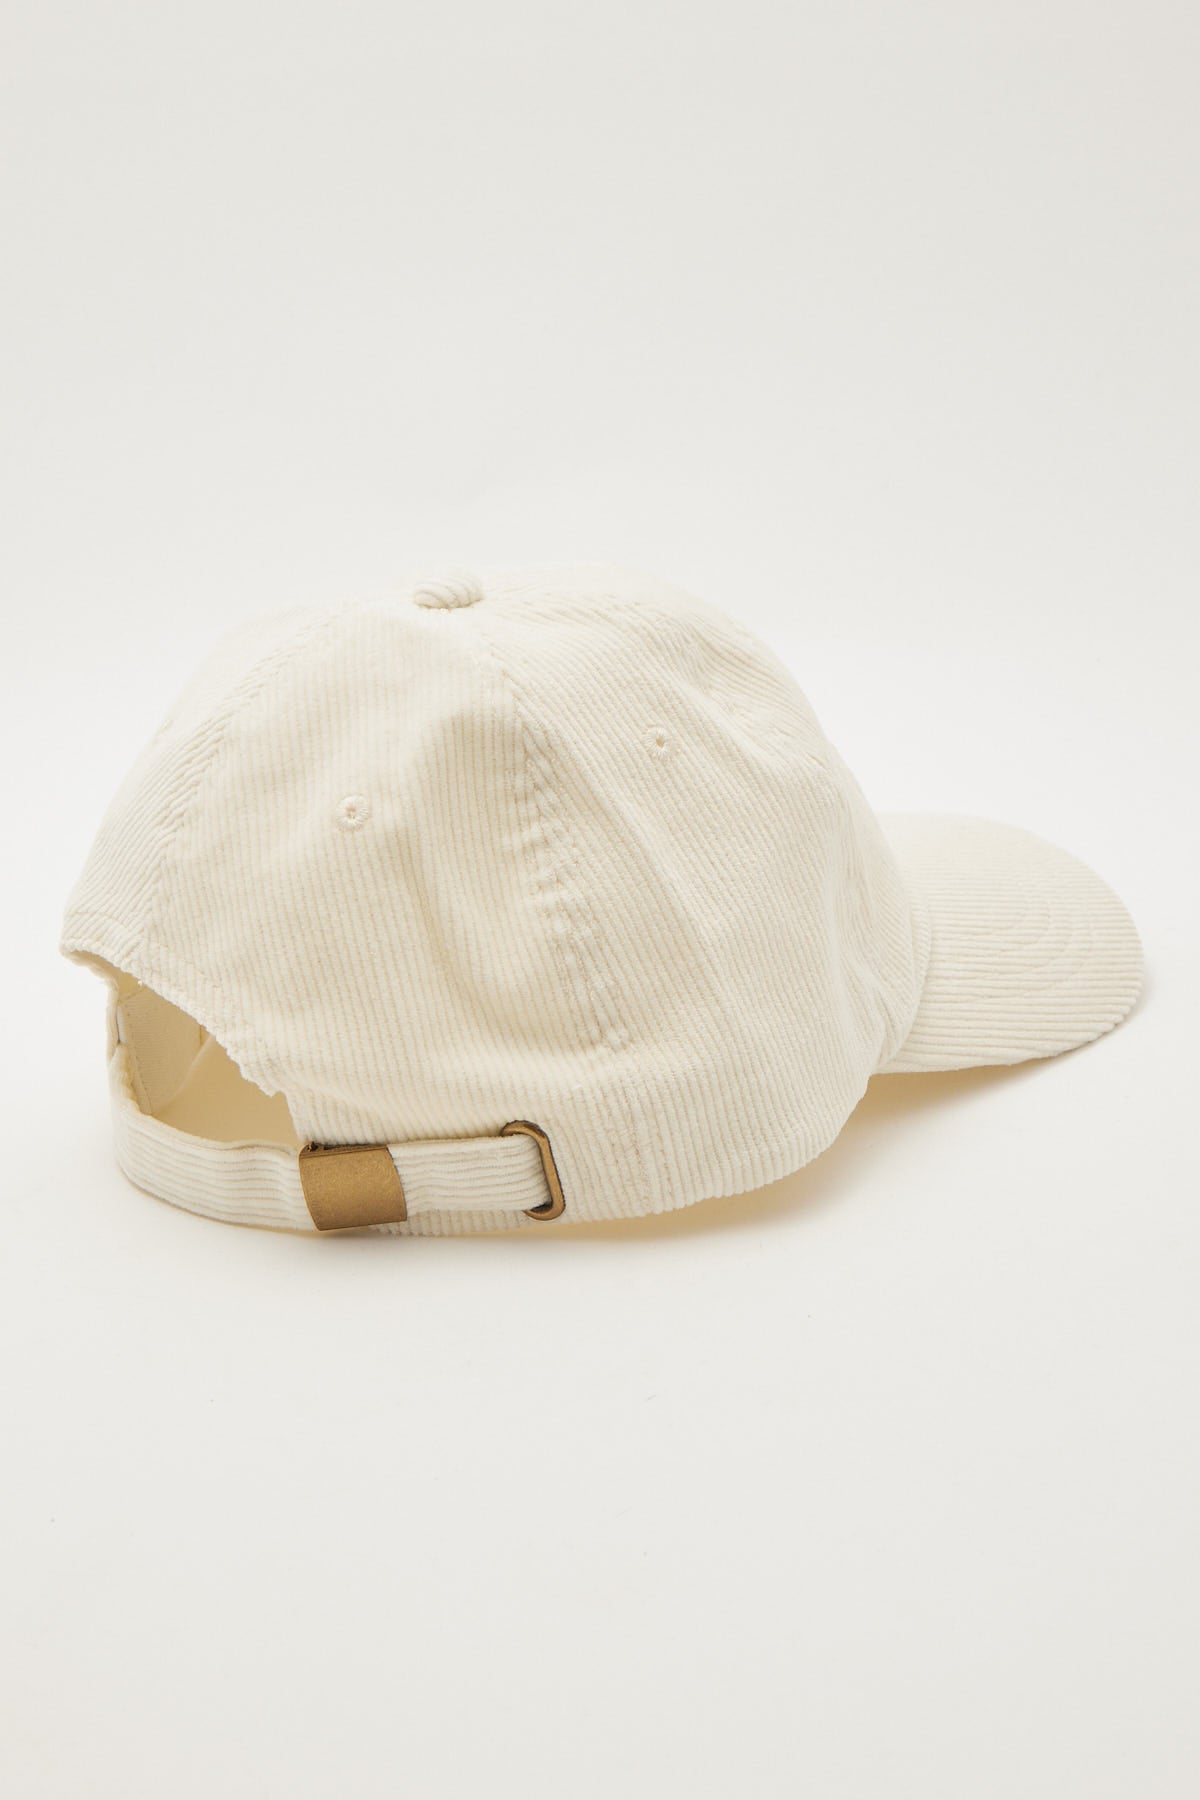 Common Need Pursuit Of Leisure Dad Cap Off White – Universal Store